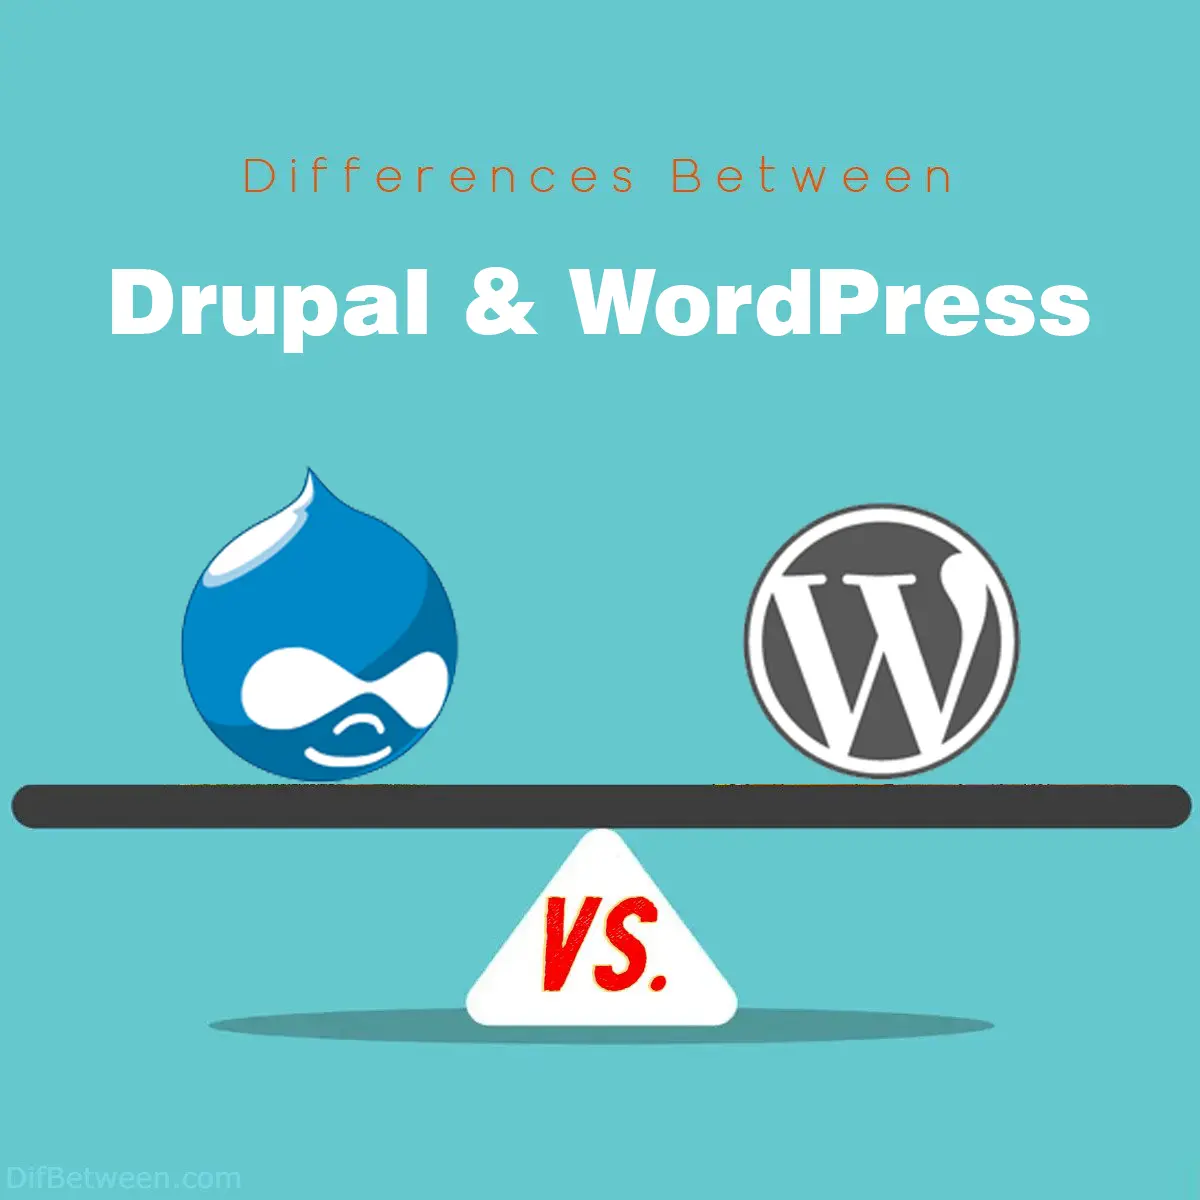 Differences Between Drupal and WordPress